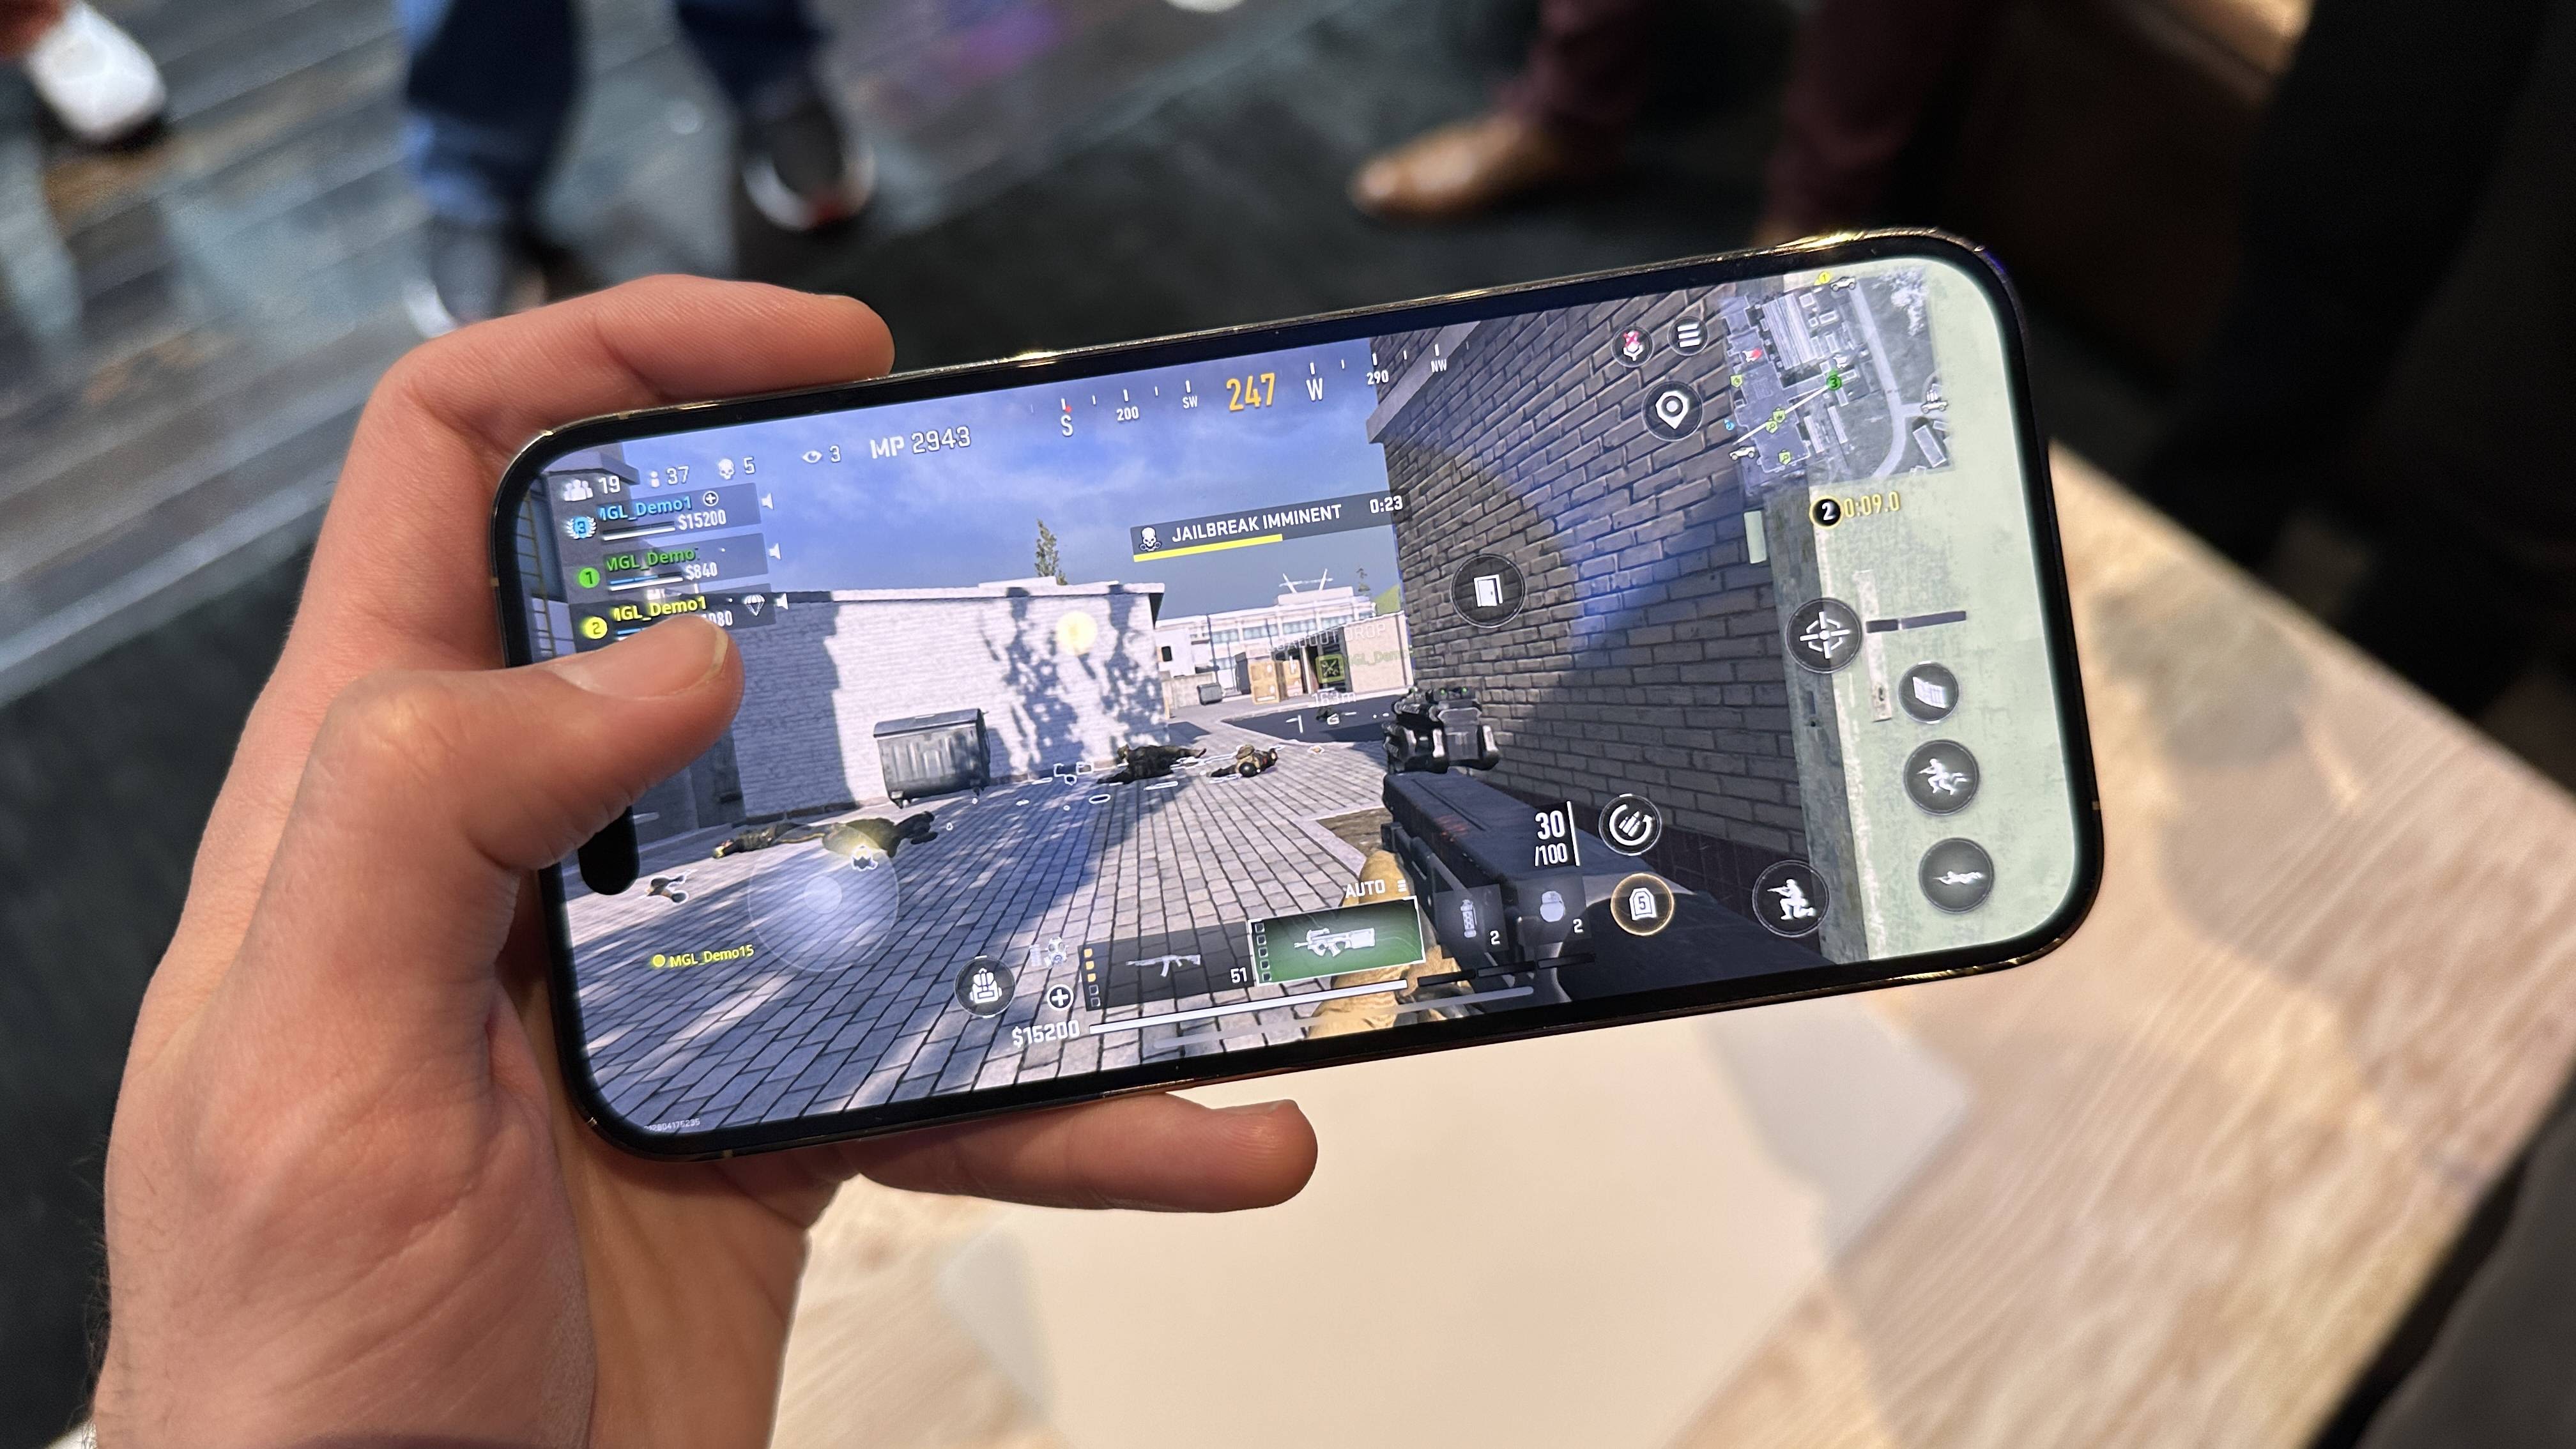 Call of Duty WARZONE Mobile: requirements to play and compatible phones -  Mobile Gamer